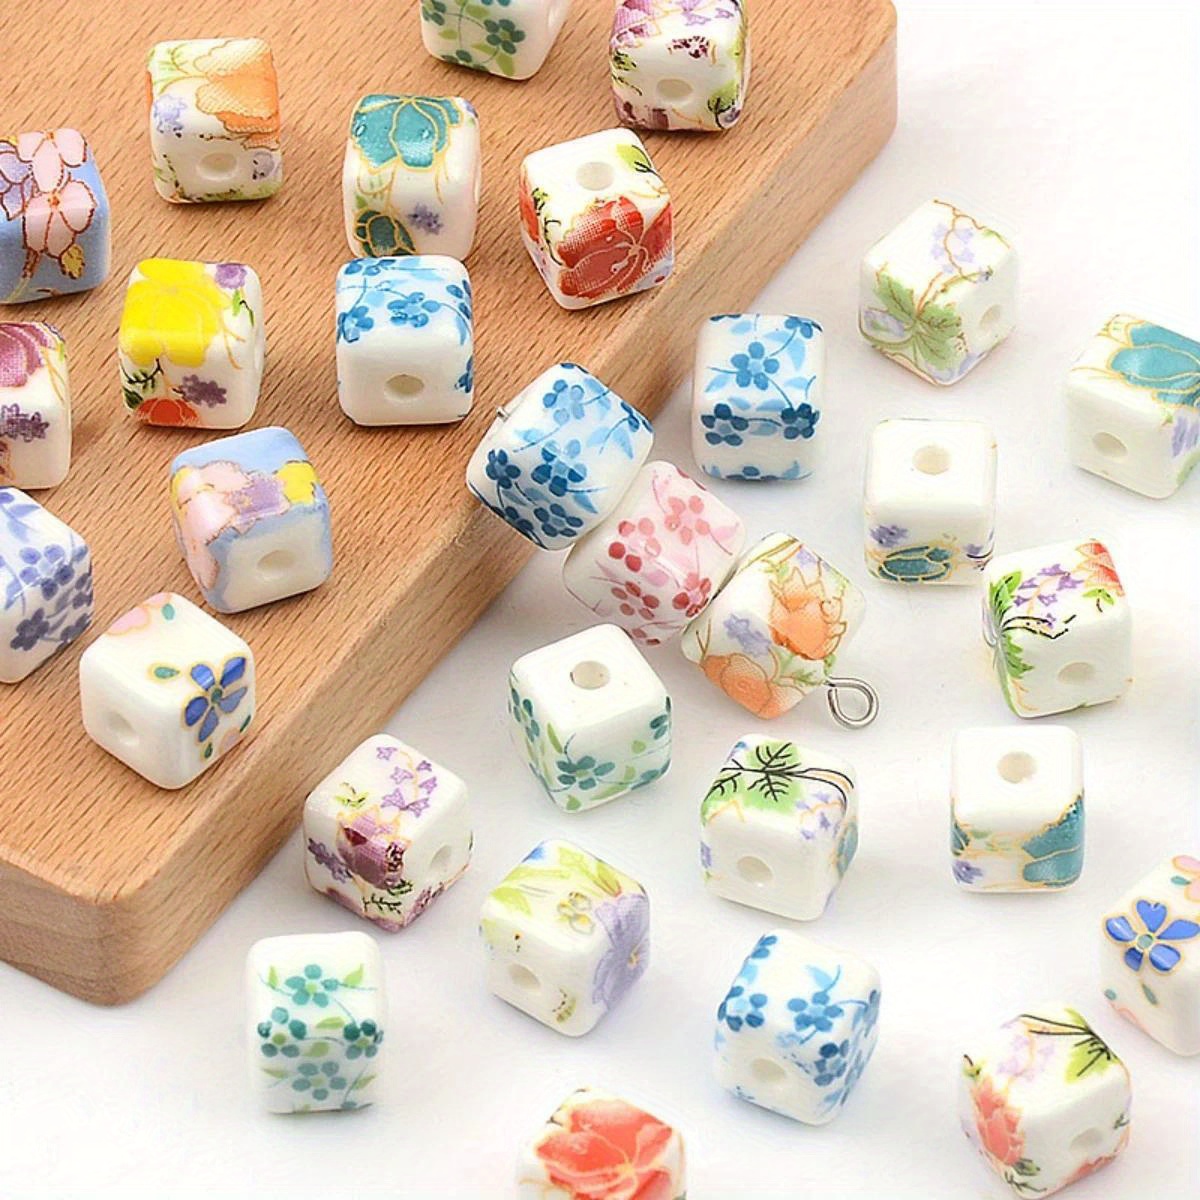 

30pcs 0.8cm Floral Pattern Random Colorful Mix Square Beads For Jewelry Making Diy Special Bracelet Necklace Handmade Craft Supplies